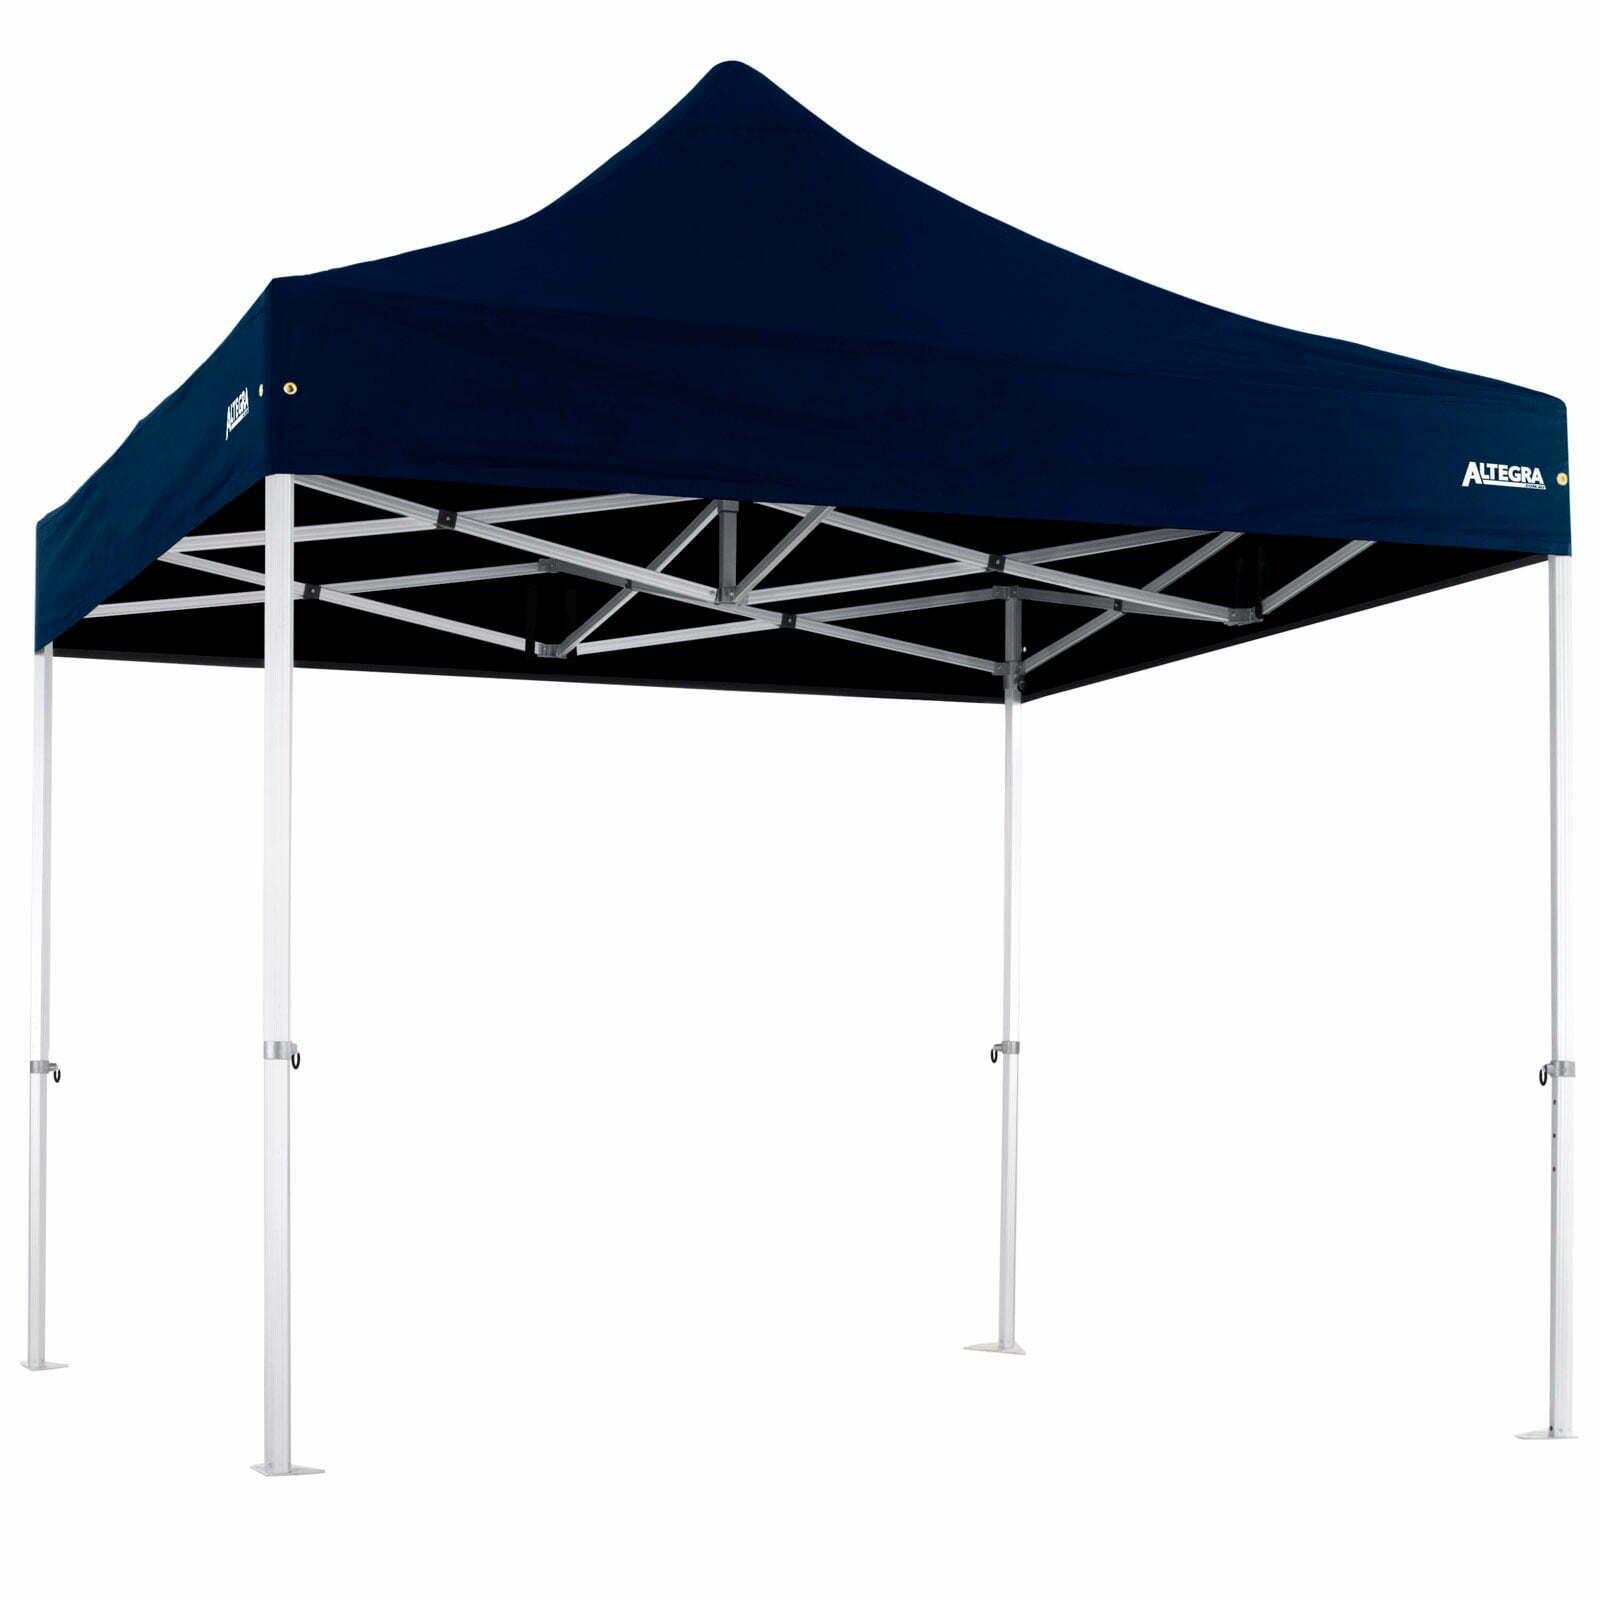 Altegra Heavy Duty 3x3m gazebo with navy blue canopy - Australia's leading heavy duty 3x3 marquee for dependable commercial or private use with robust aluminium frame and backed by a lifetime warranty.